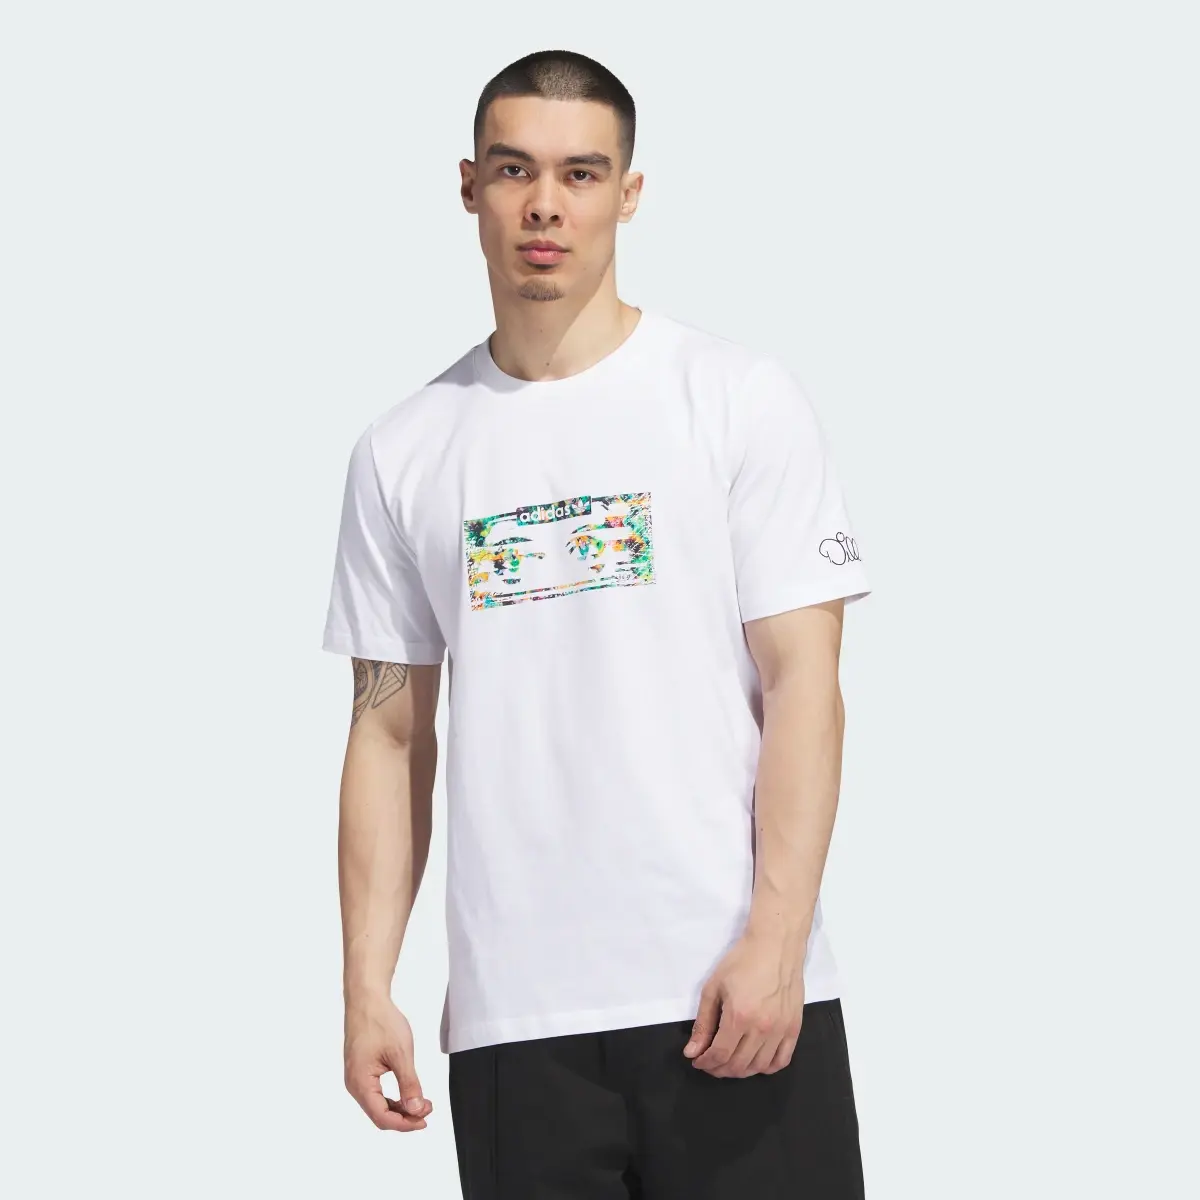 Adidas T-shirt manches courtes Dill Eyes. 2